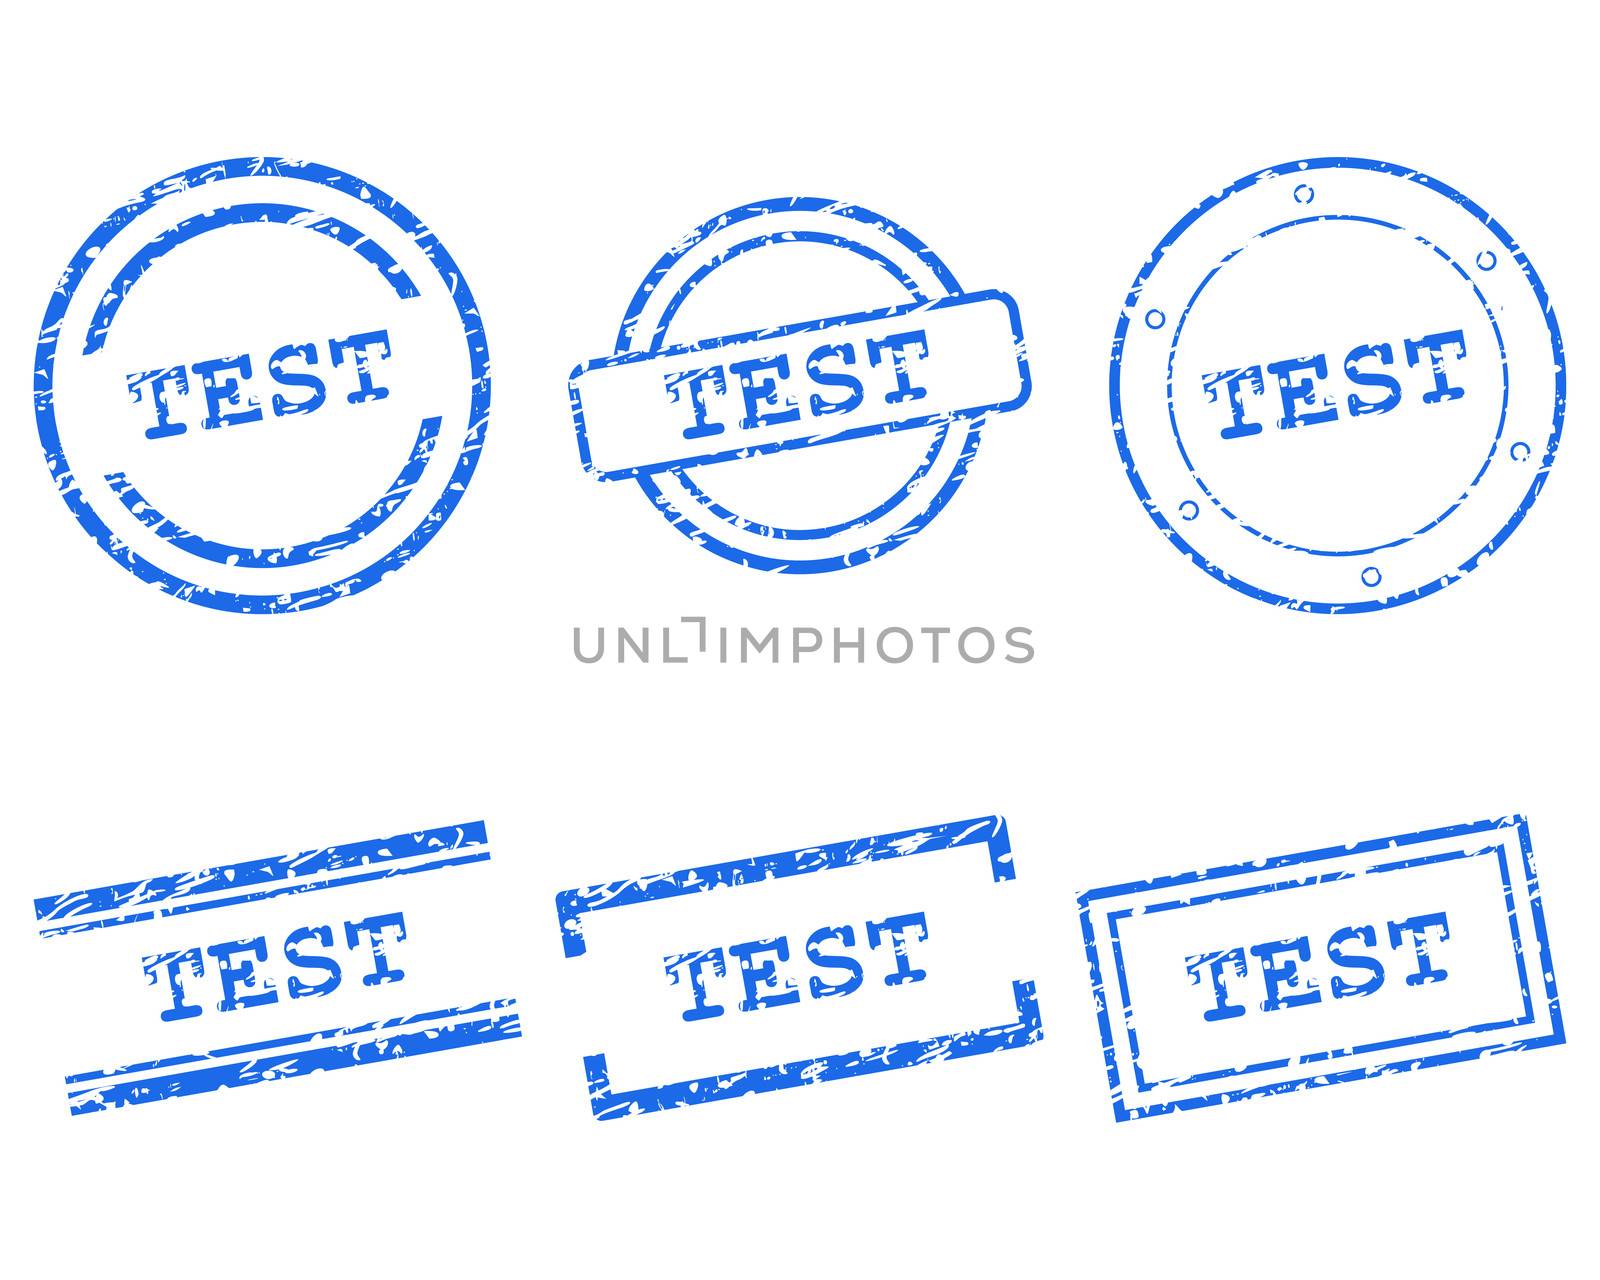 Test stamps by rbiedermann